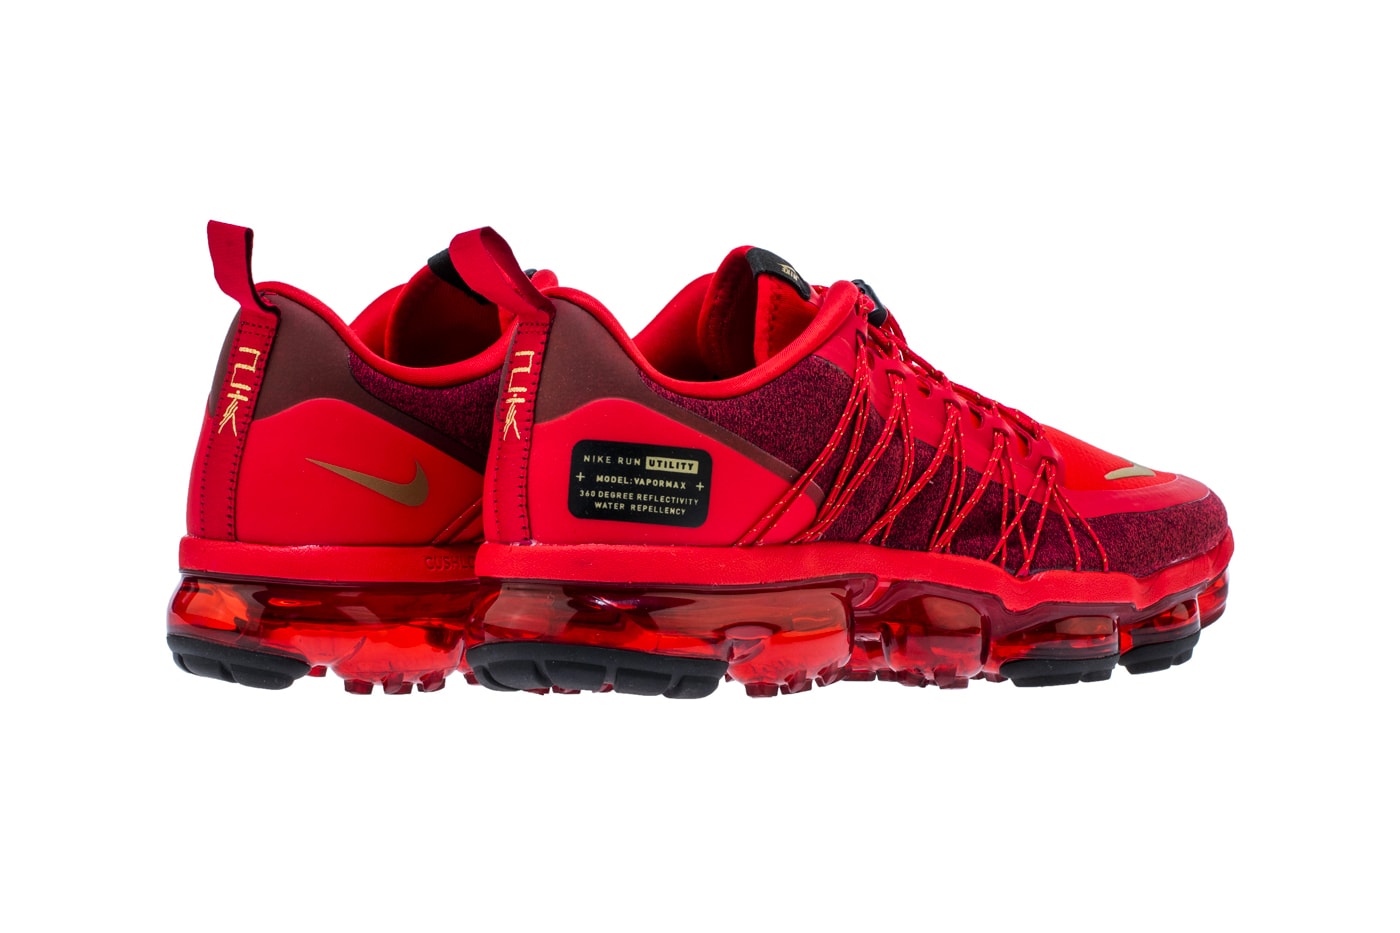 Nike Air VaporMax Utility CNY Release Date red sneaker february 2019 chinese new year